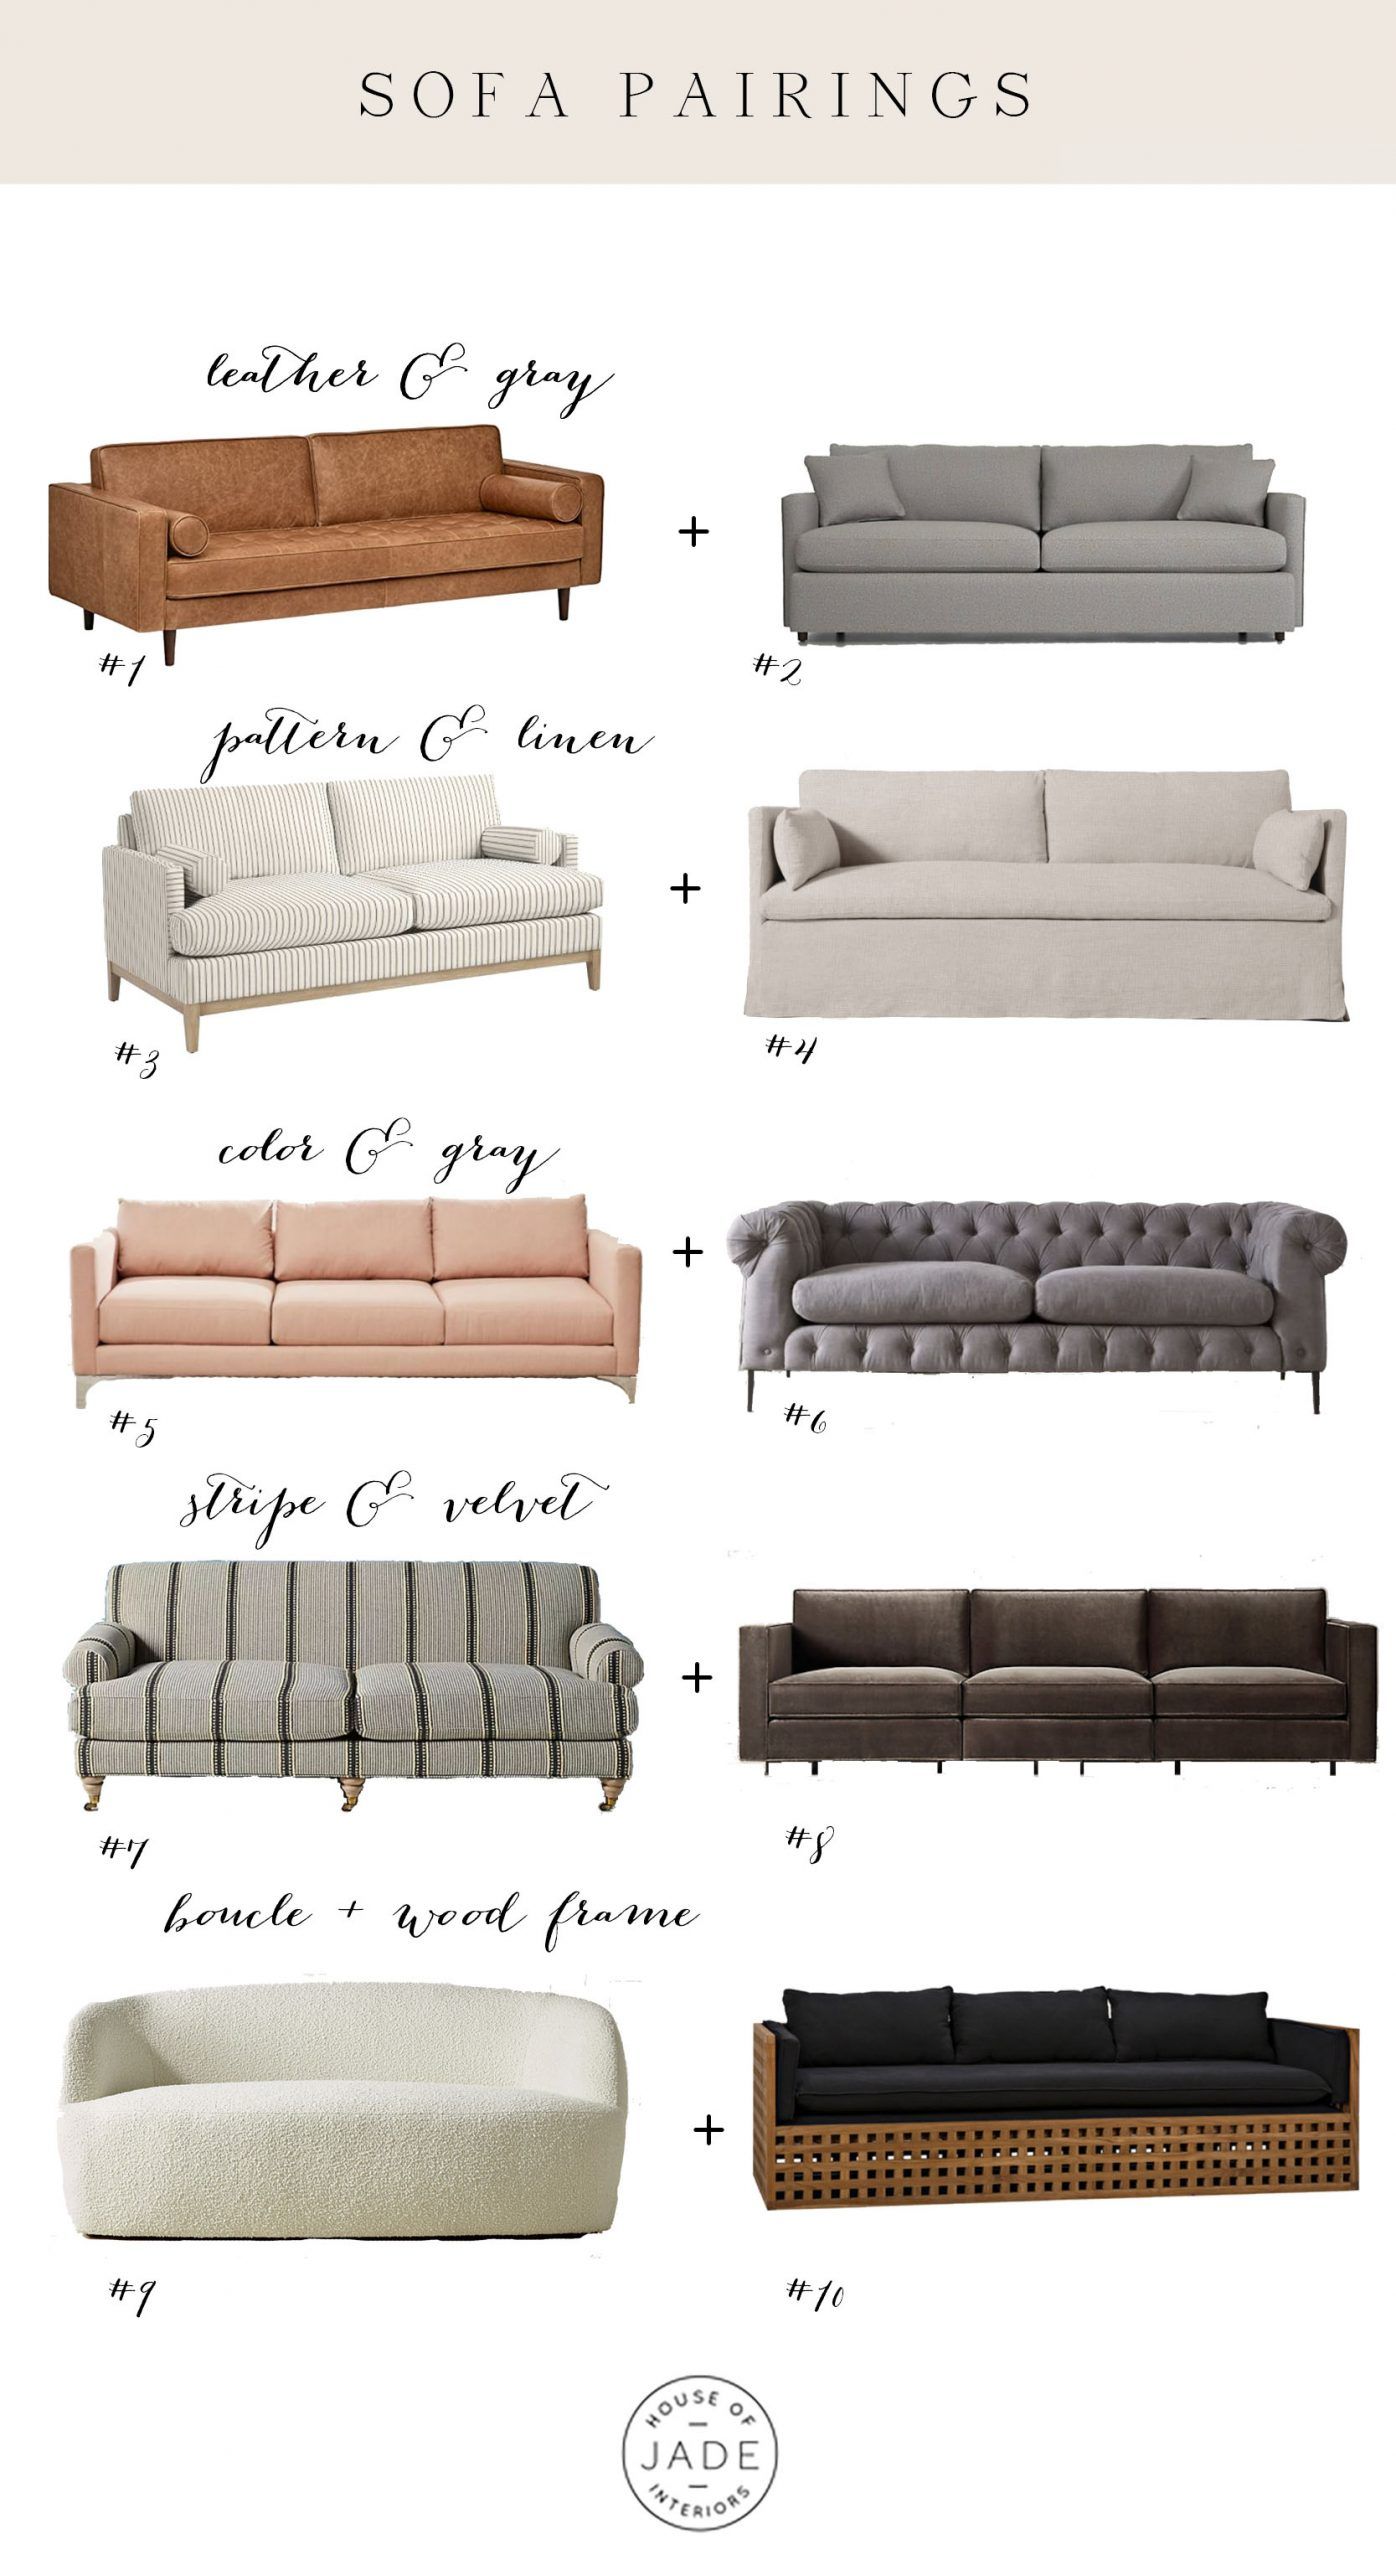 Sofa Pairing Tips | House Of Jade Interiors With Sofas In Multiple Colors (View 8 of 15)